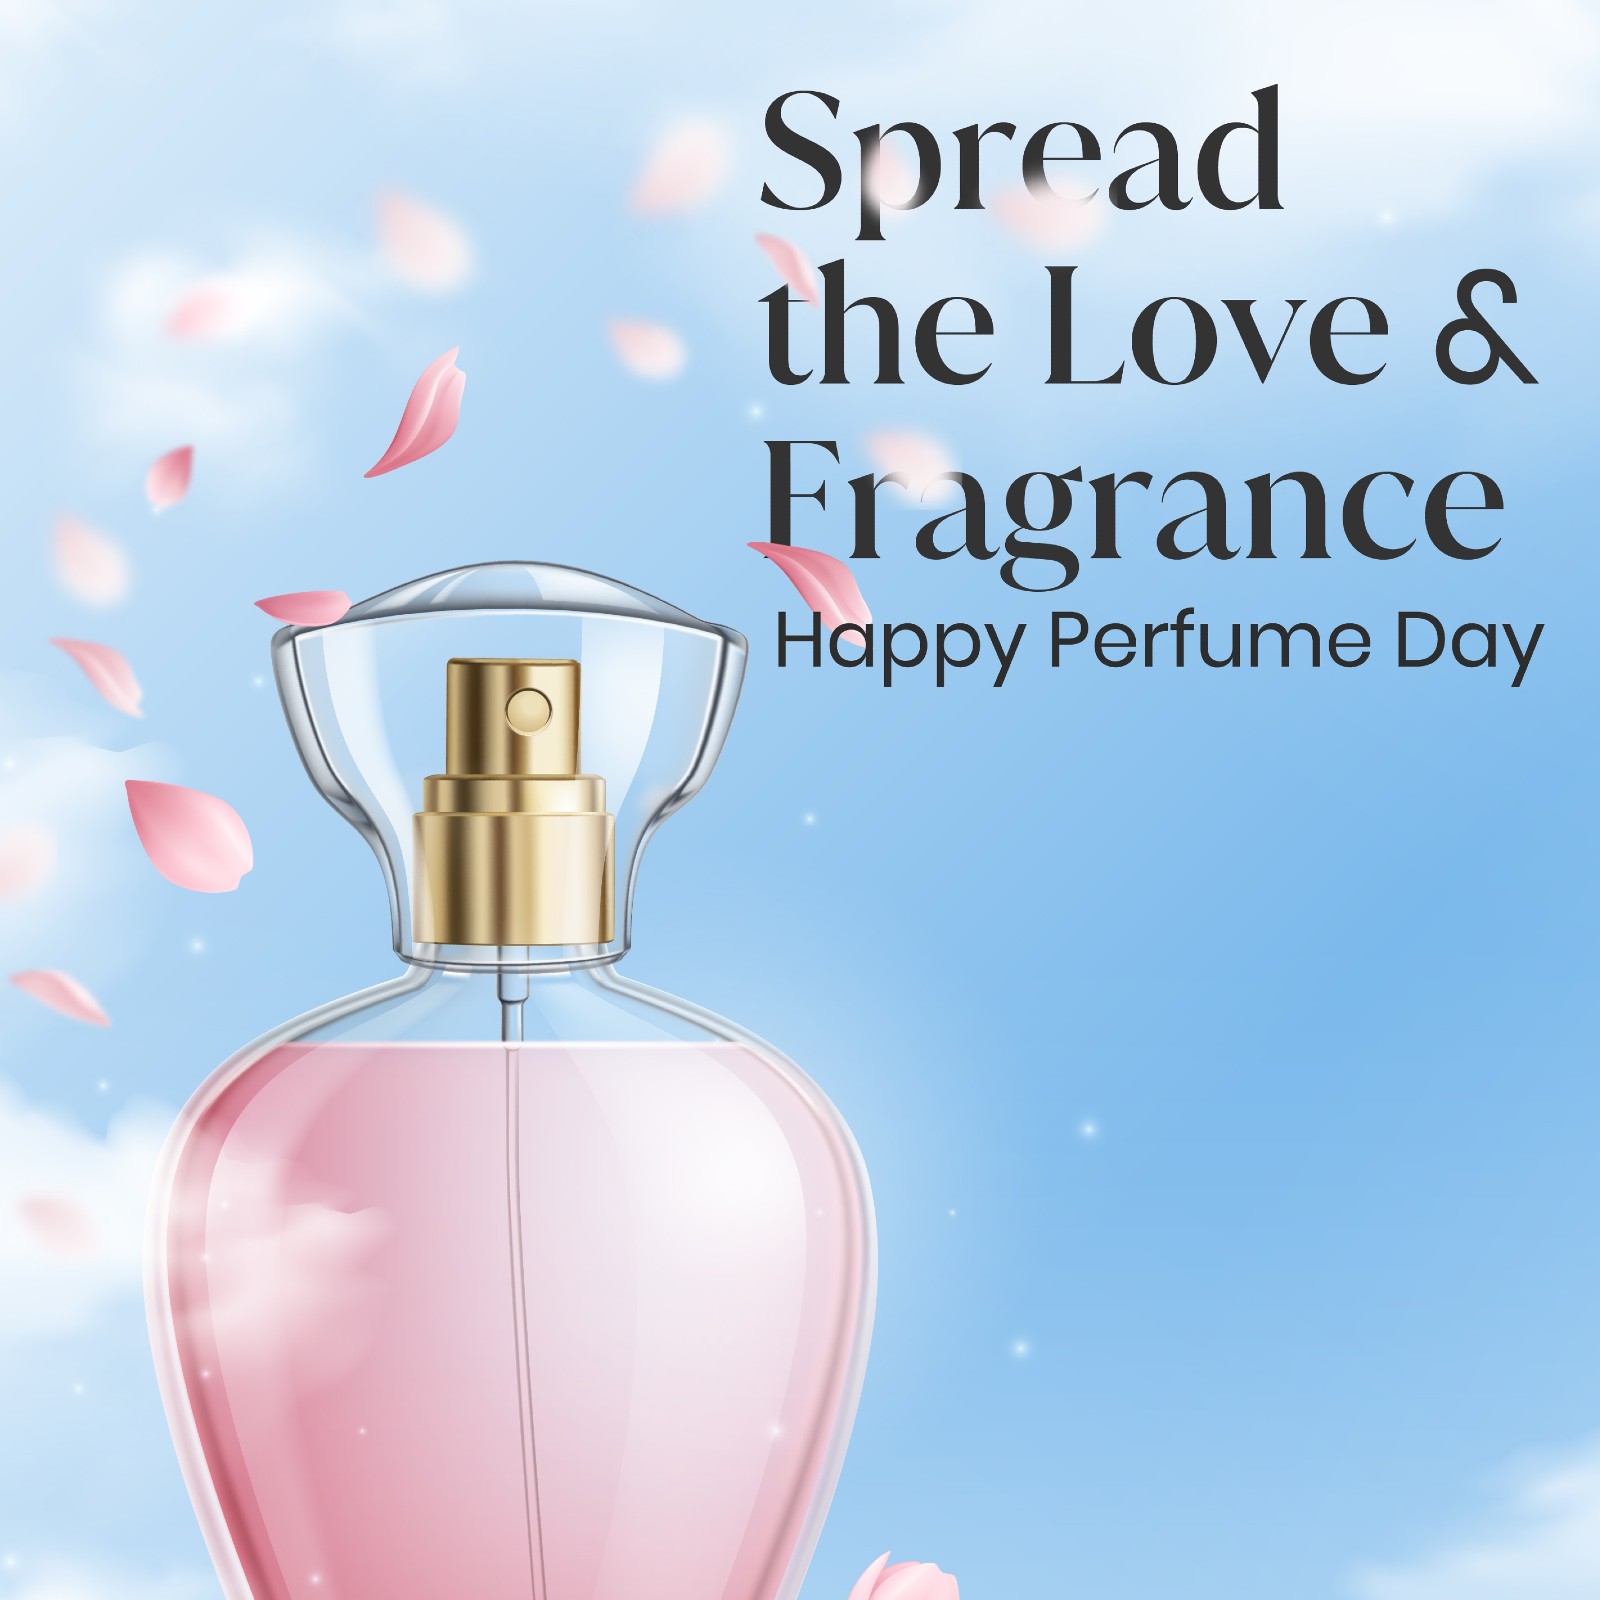 Drawing Perfume, valentines Gift, Chanel No. 5, chanel Perfume